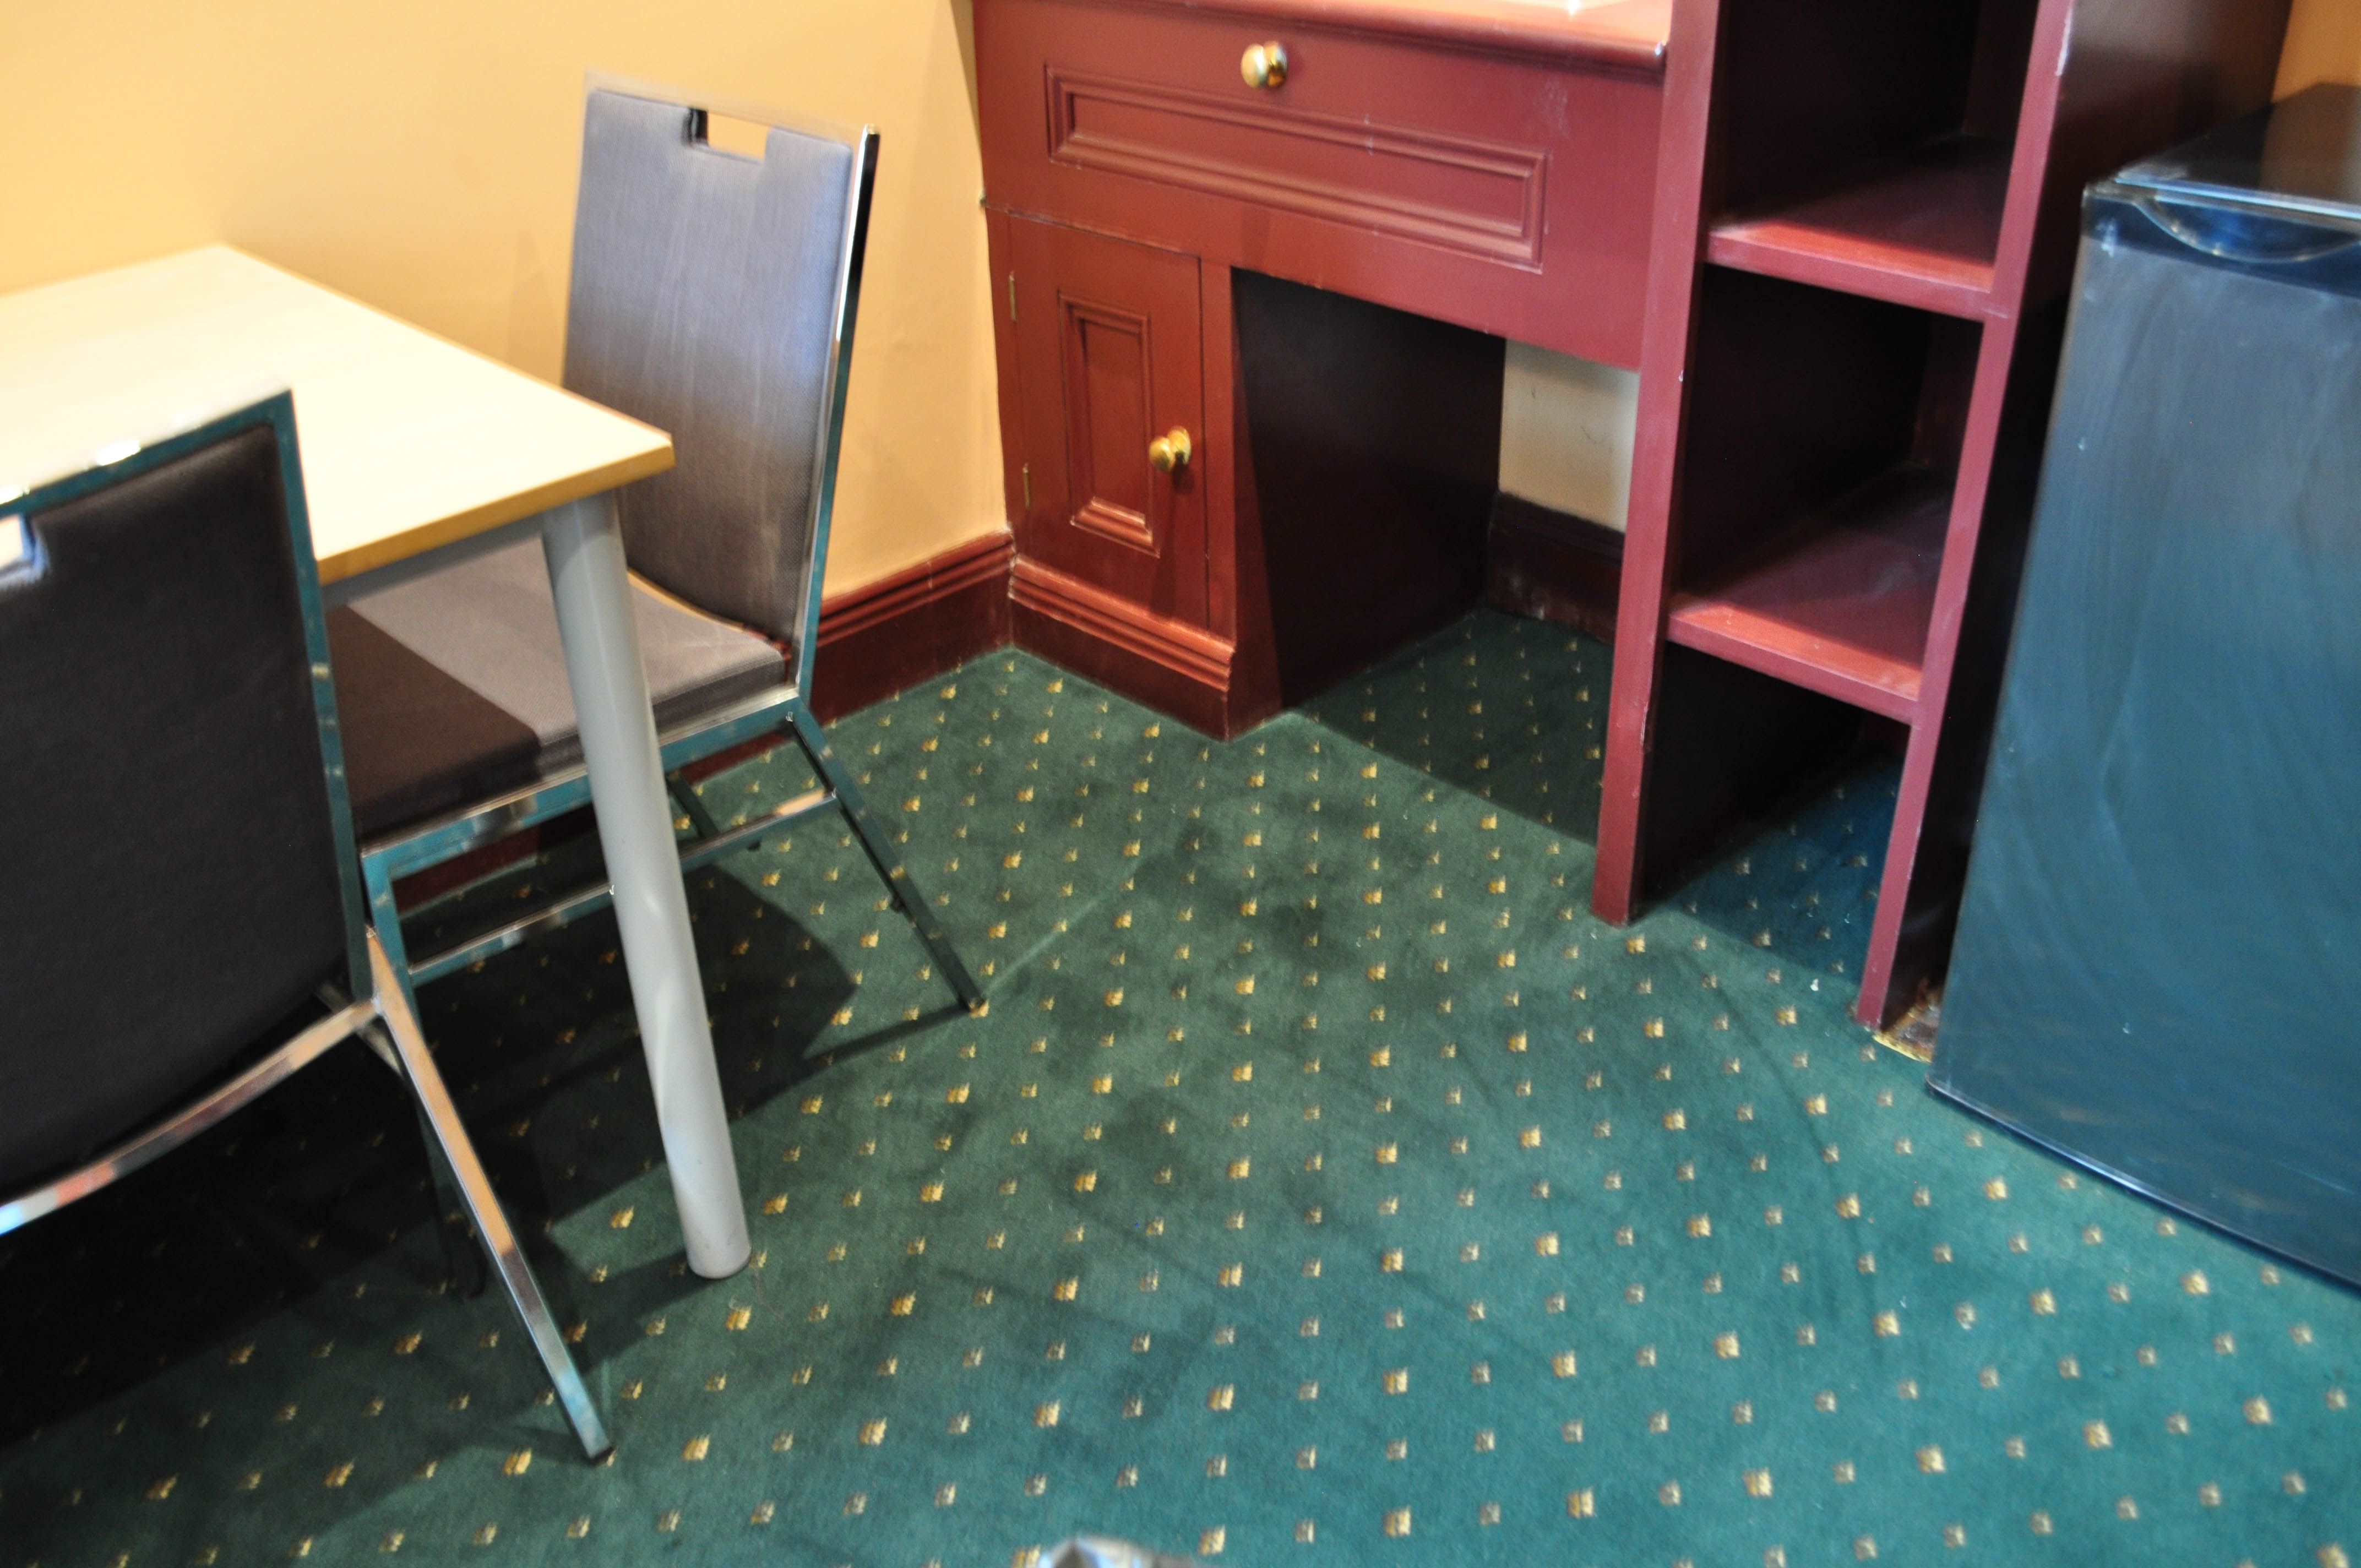 a room in the interior of a period home utilizing, a green carpet color and a period style of patterned carpet it being an aximnister carpet.
 The carpet meets a tan kitchen cabinet a simple table and chair. The walls are painted a deep orange color, which is a period decor. The home is in Melbourne, Vic 3000 and the carpet
 installed by Concord Floors.